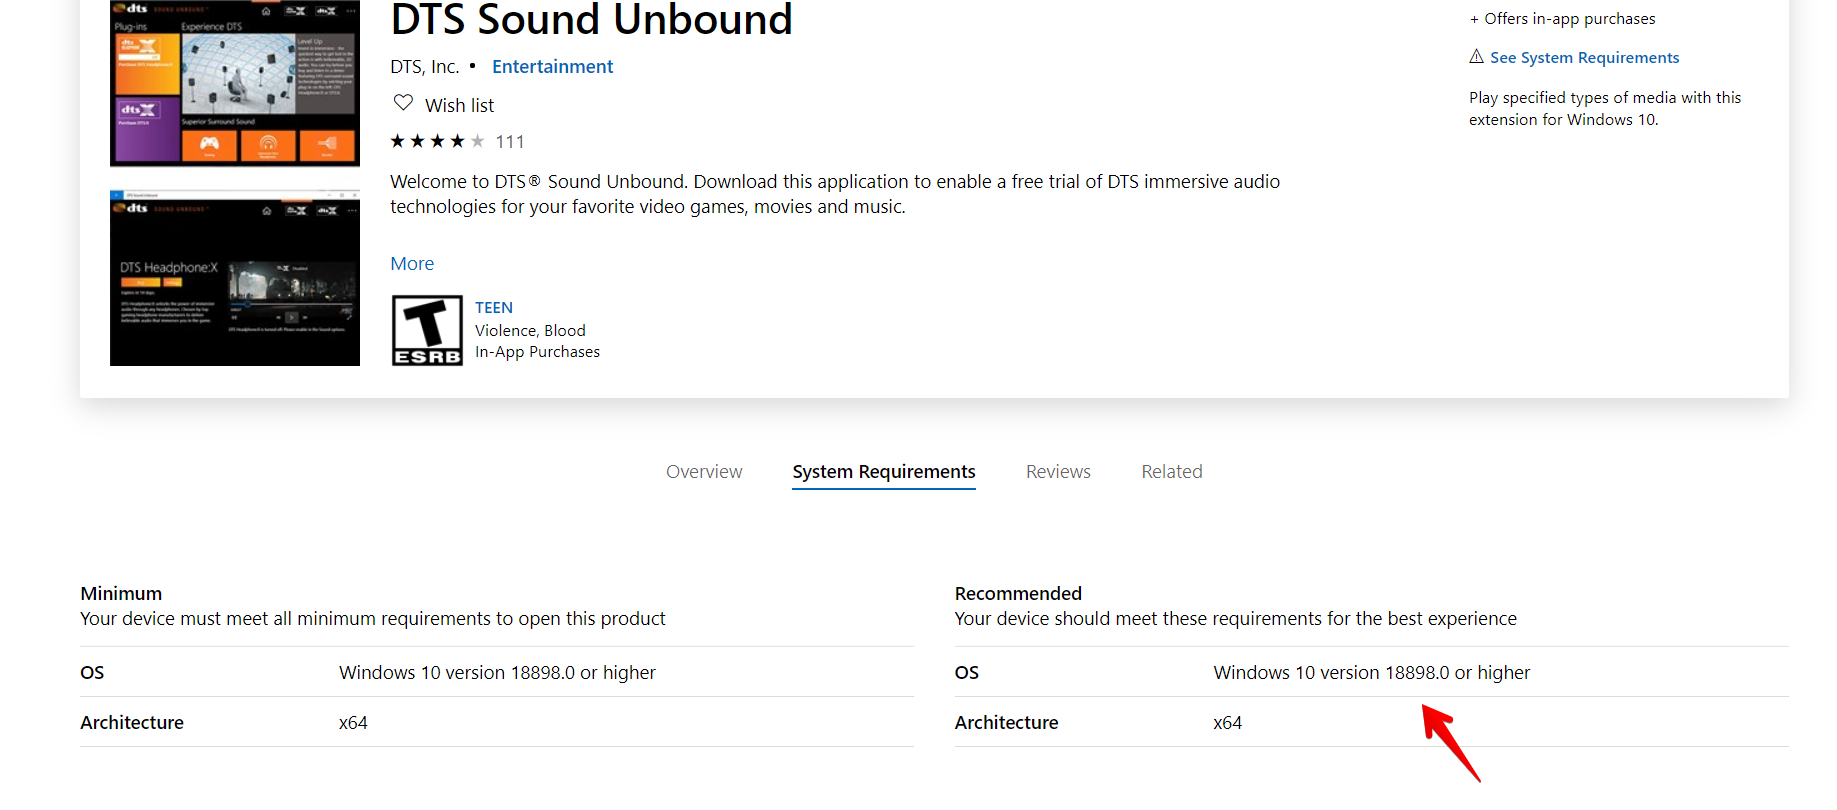 DTS Sound Unbound now has a "no-tune" option with latest update 90083ed8-70e9-43d9-9bf6-9009ea403106?upload=true.png